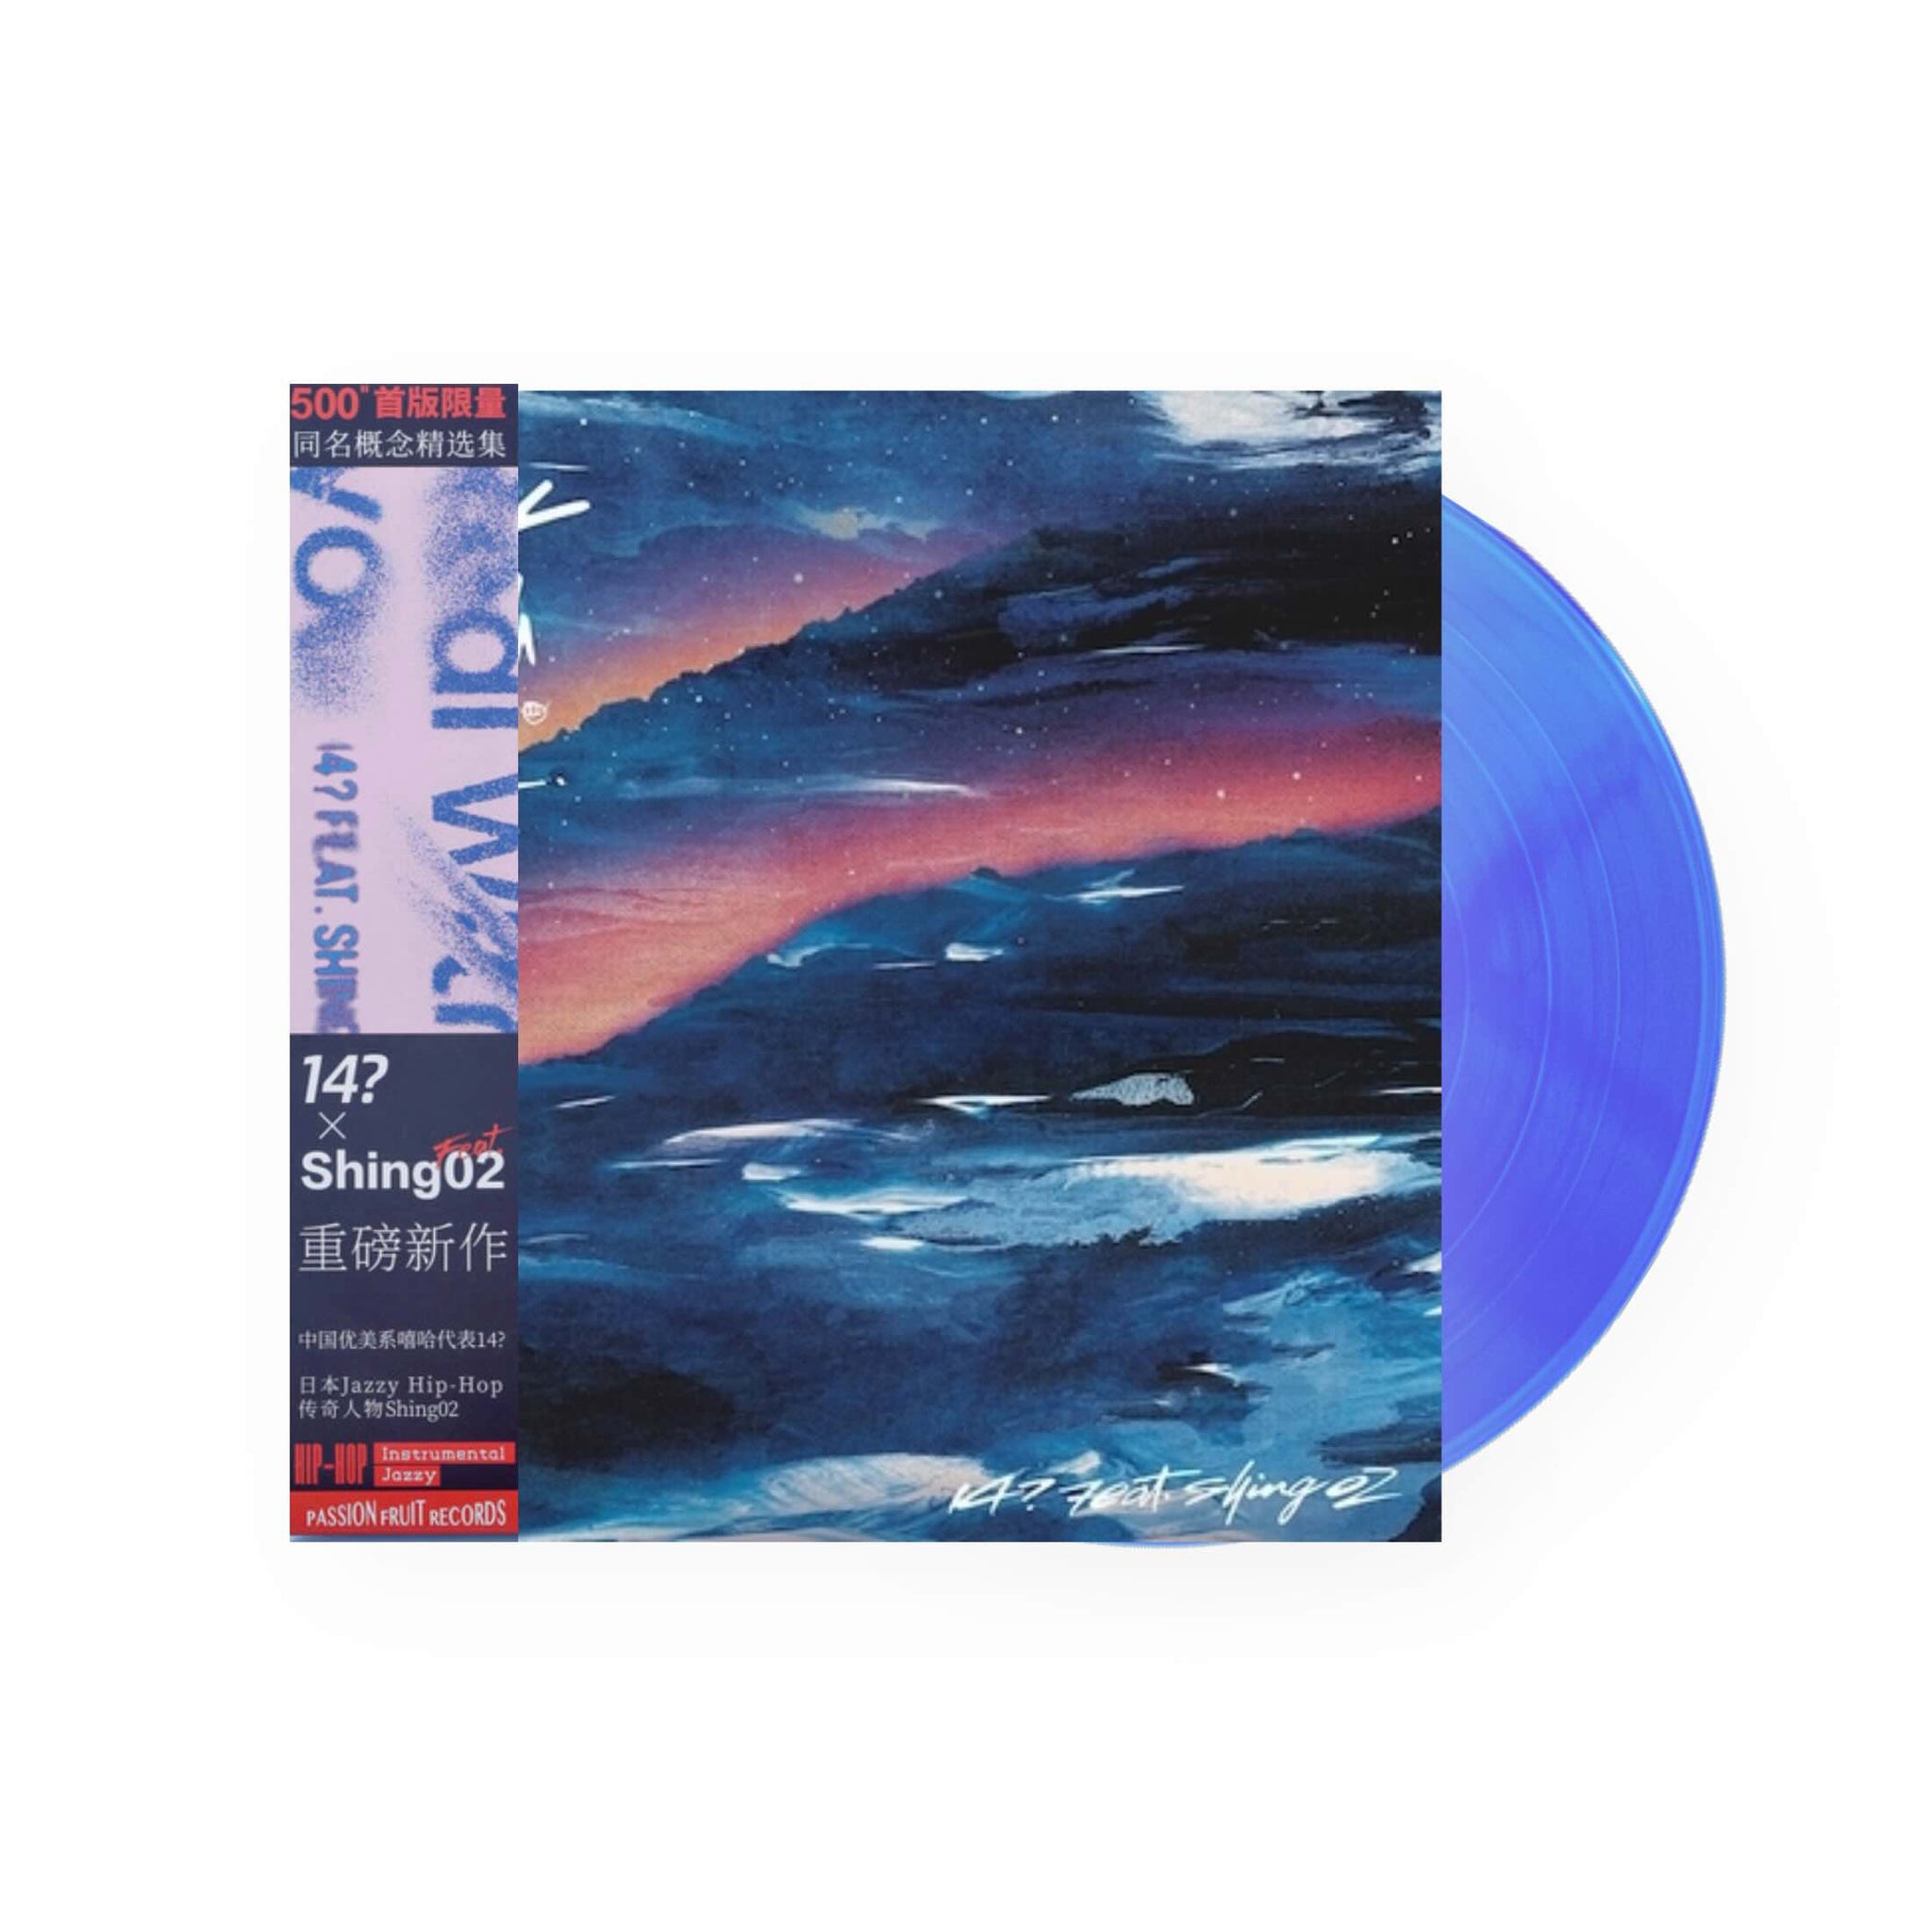 14? Feat. Shing02 - Real With You 12 (Blue Vinyl)